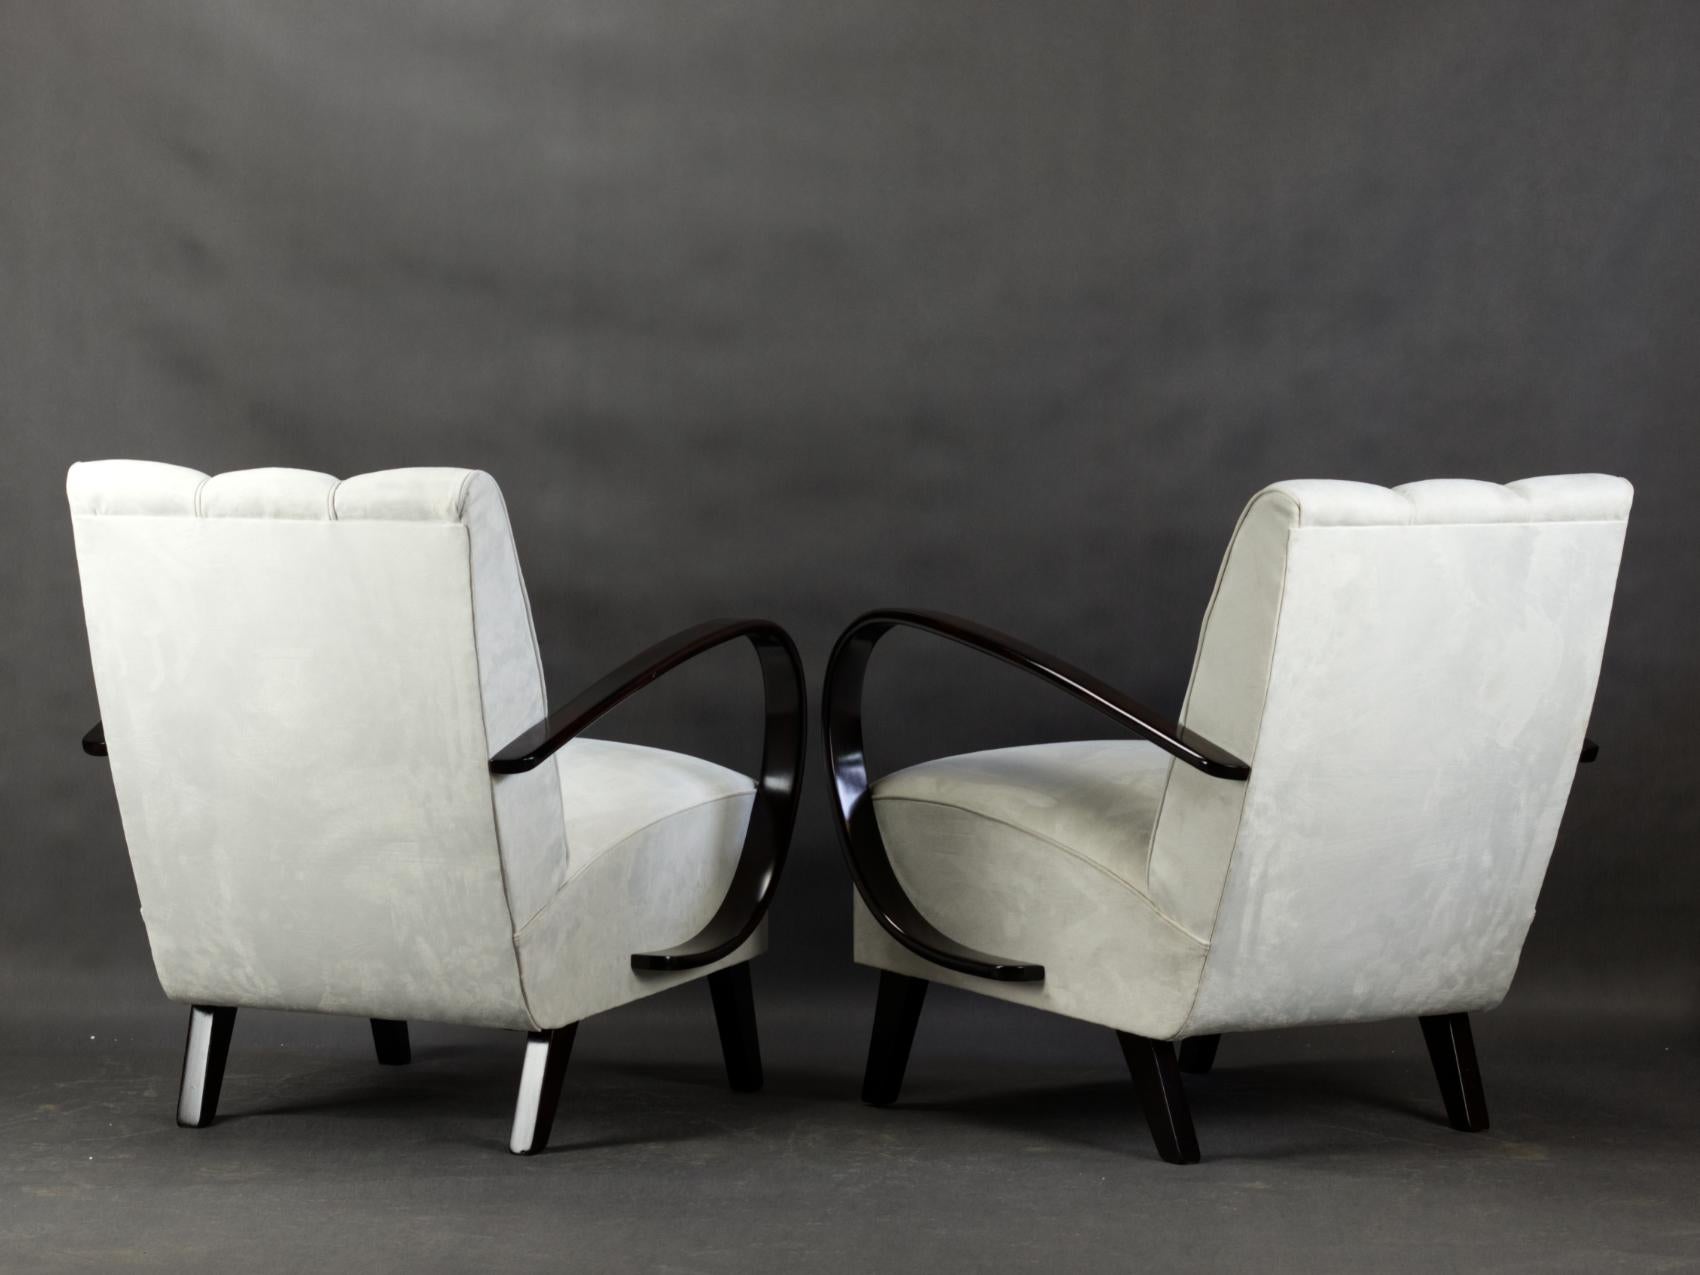 Upholstery Pair of Armchairs by Jindrich Halabala, 1950s For Sale